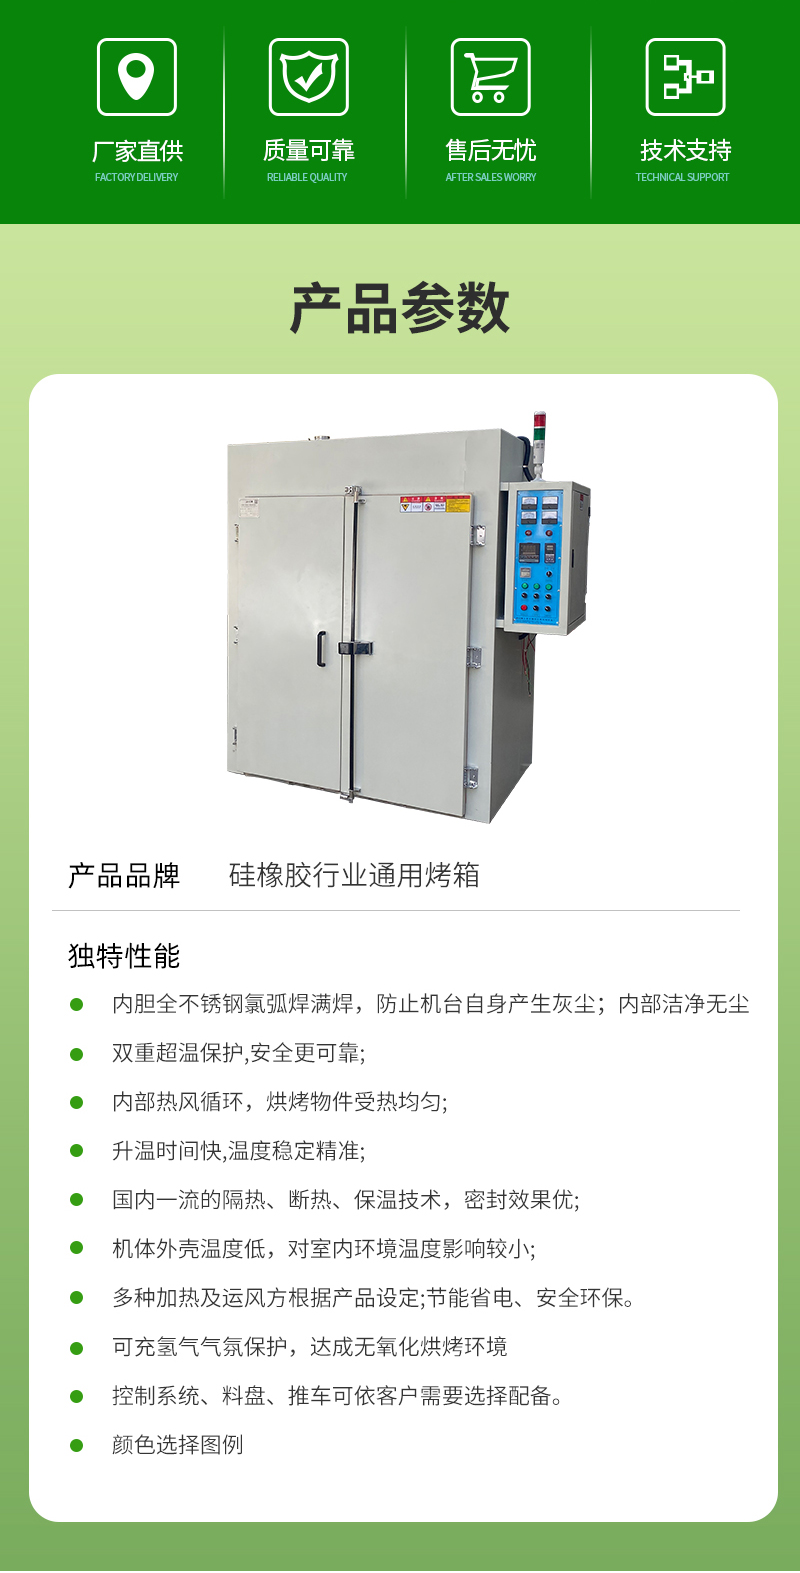 Yimei supplies a brand new stainless steel silicone rubber industry with 380V universal industrial high-temperature baking oven for non-standard customization